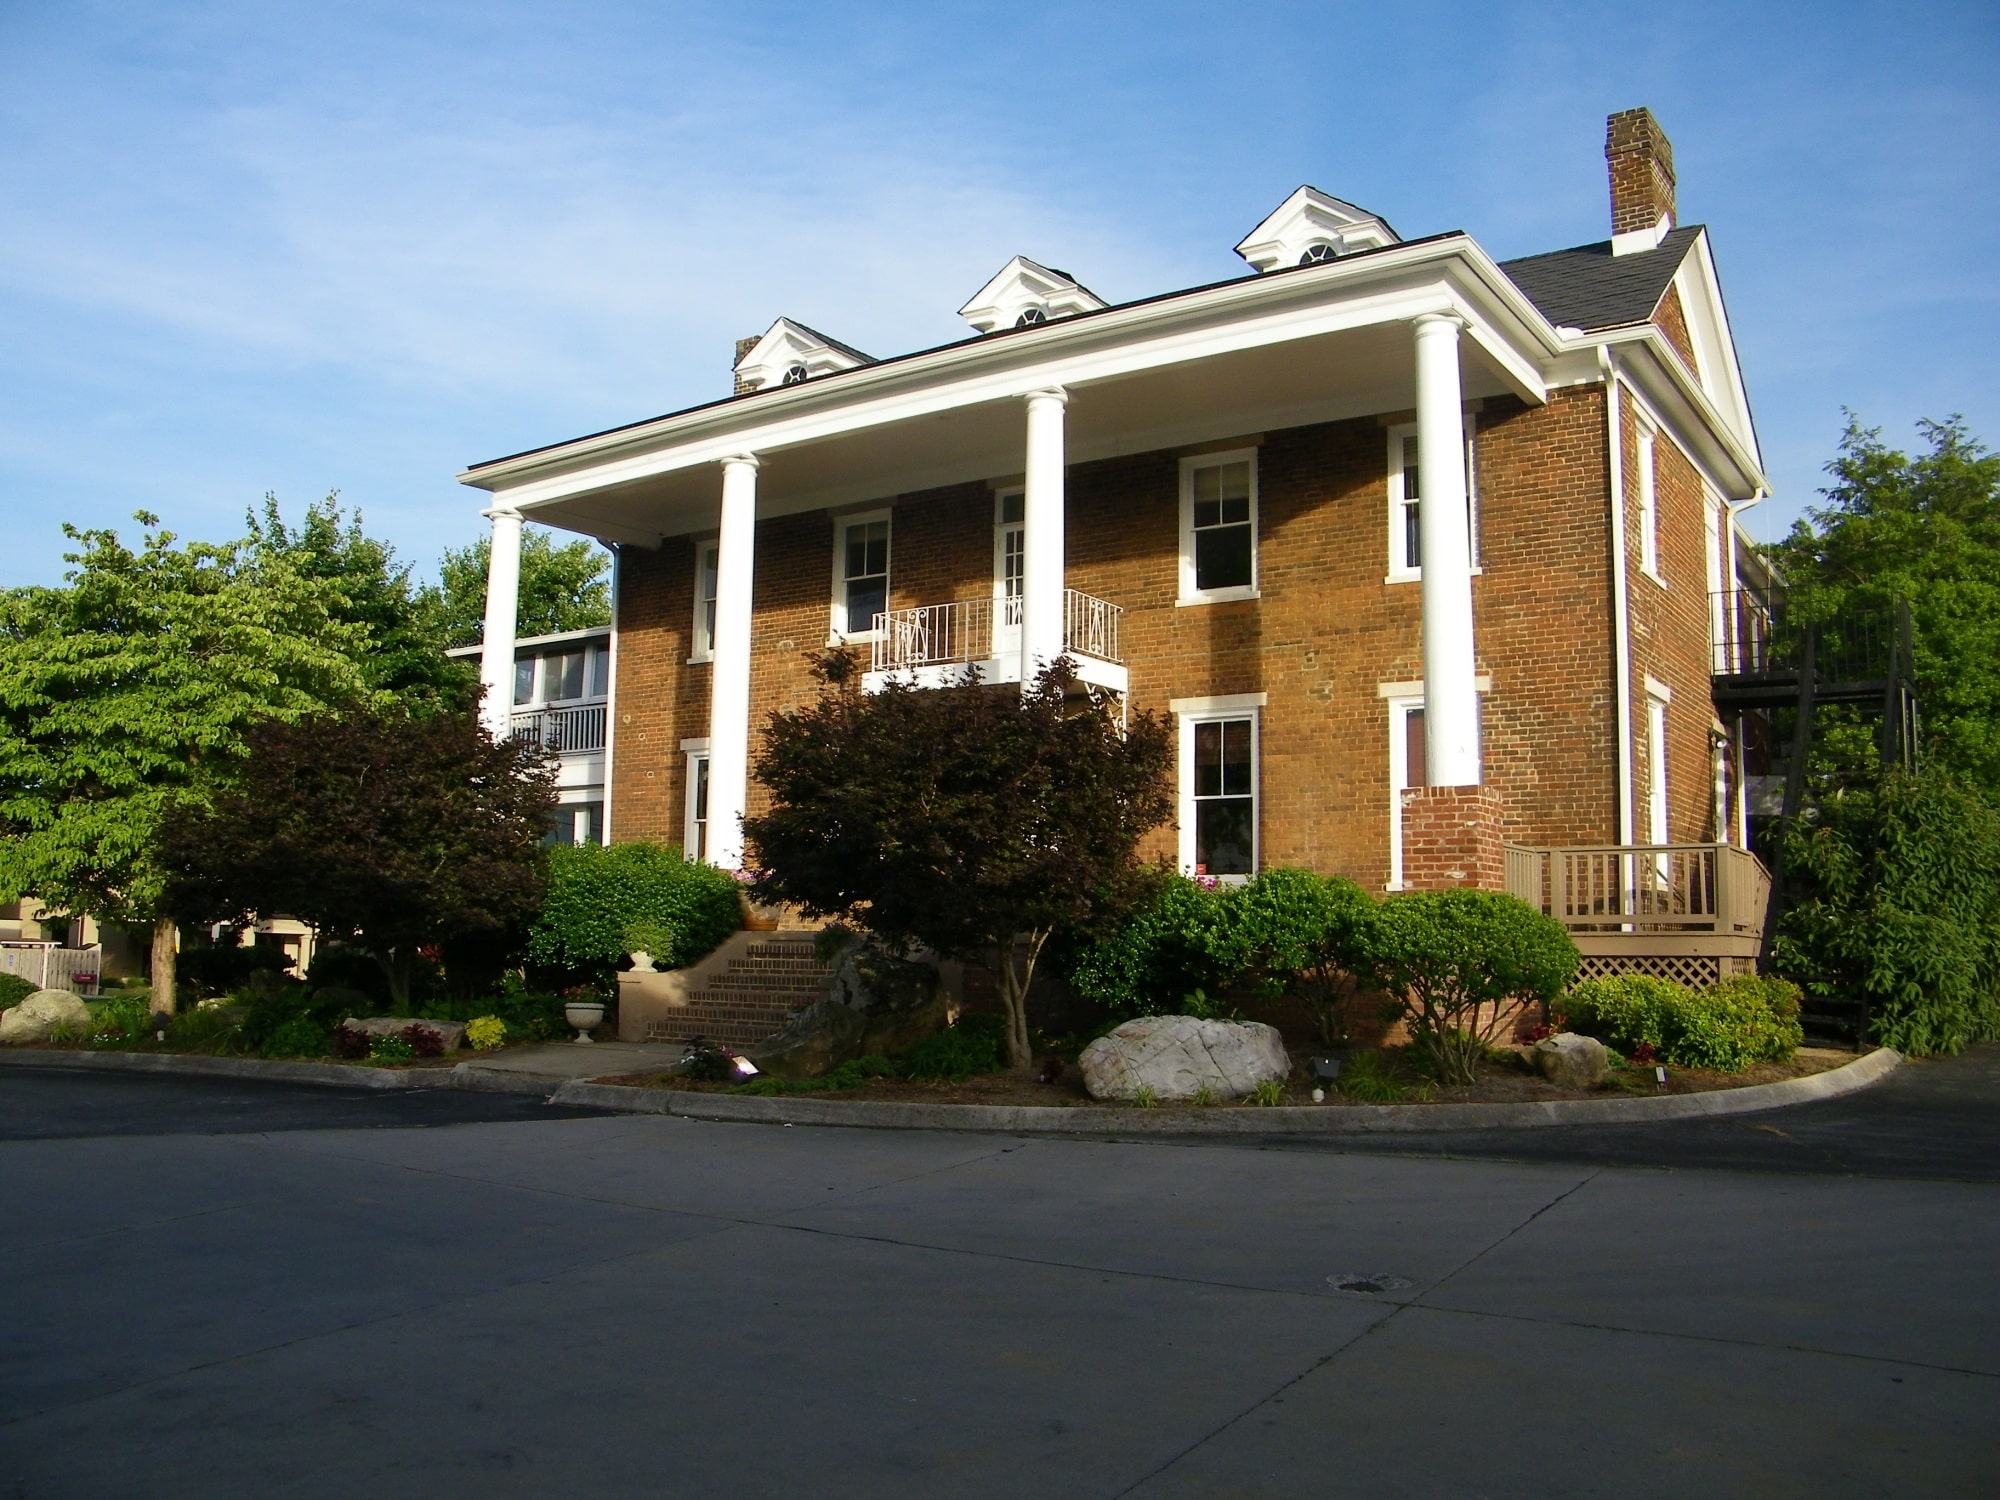 Baker-Peters House